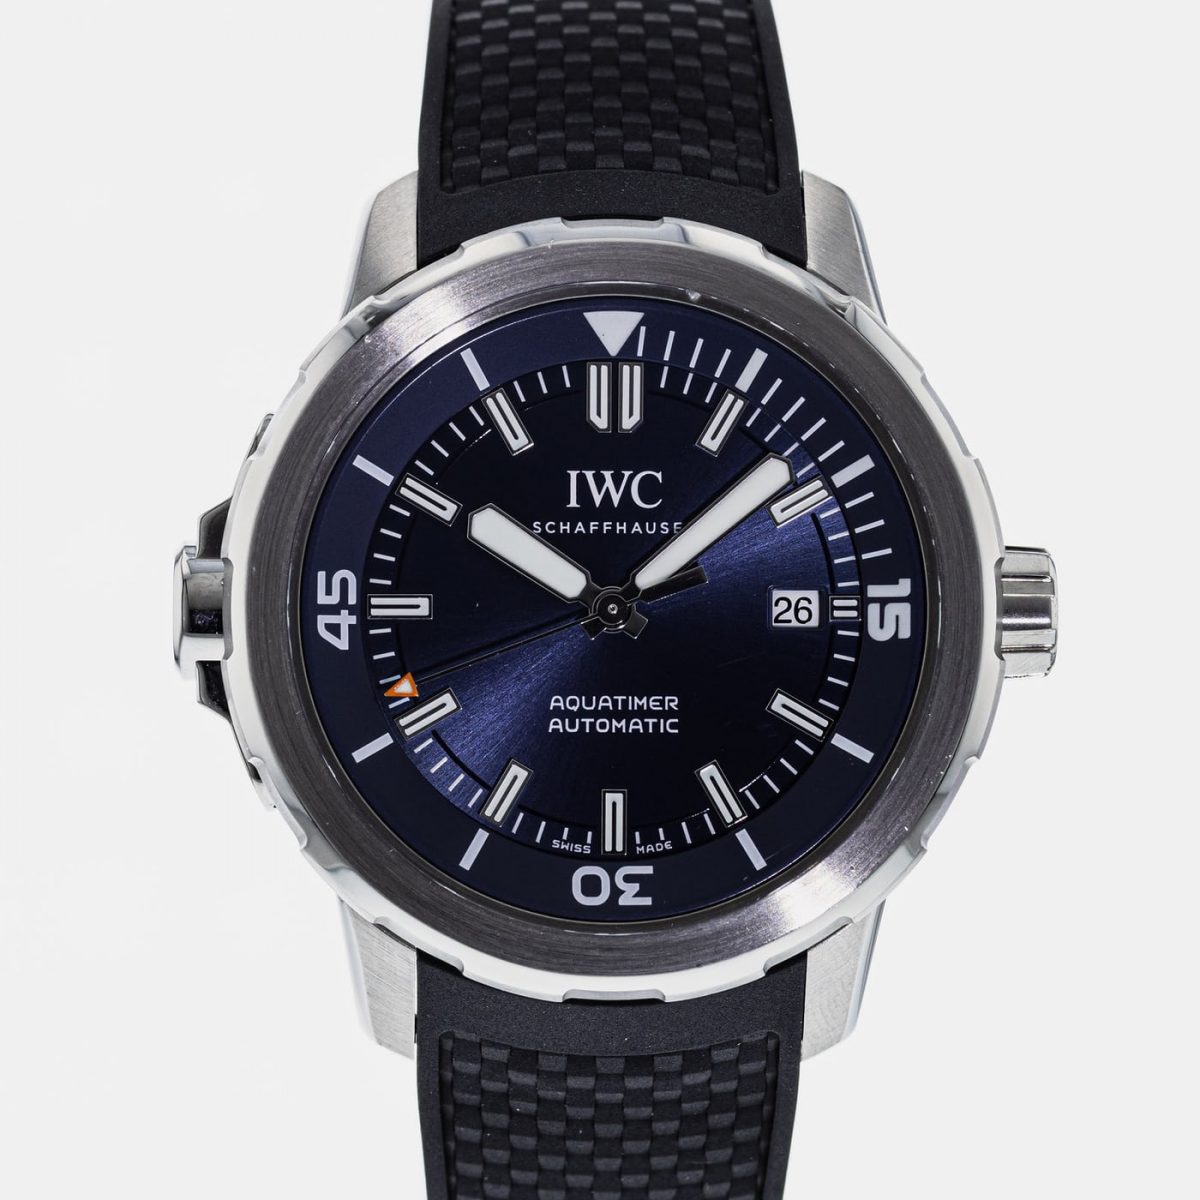 UK Best 1:1 Replica IWC Aquatimer Expedition Jacques-Yves Cousteau